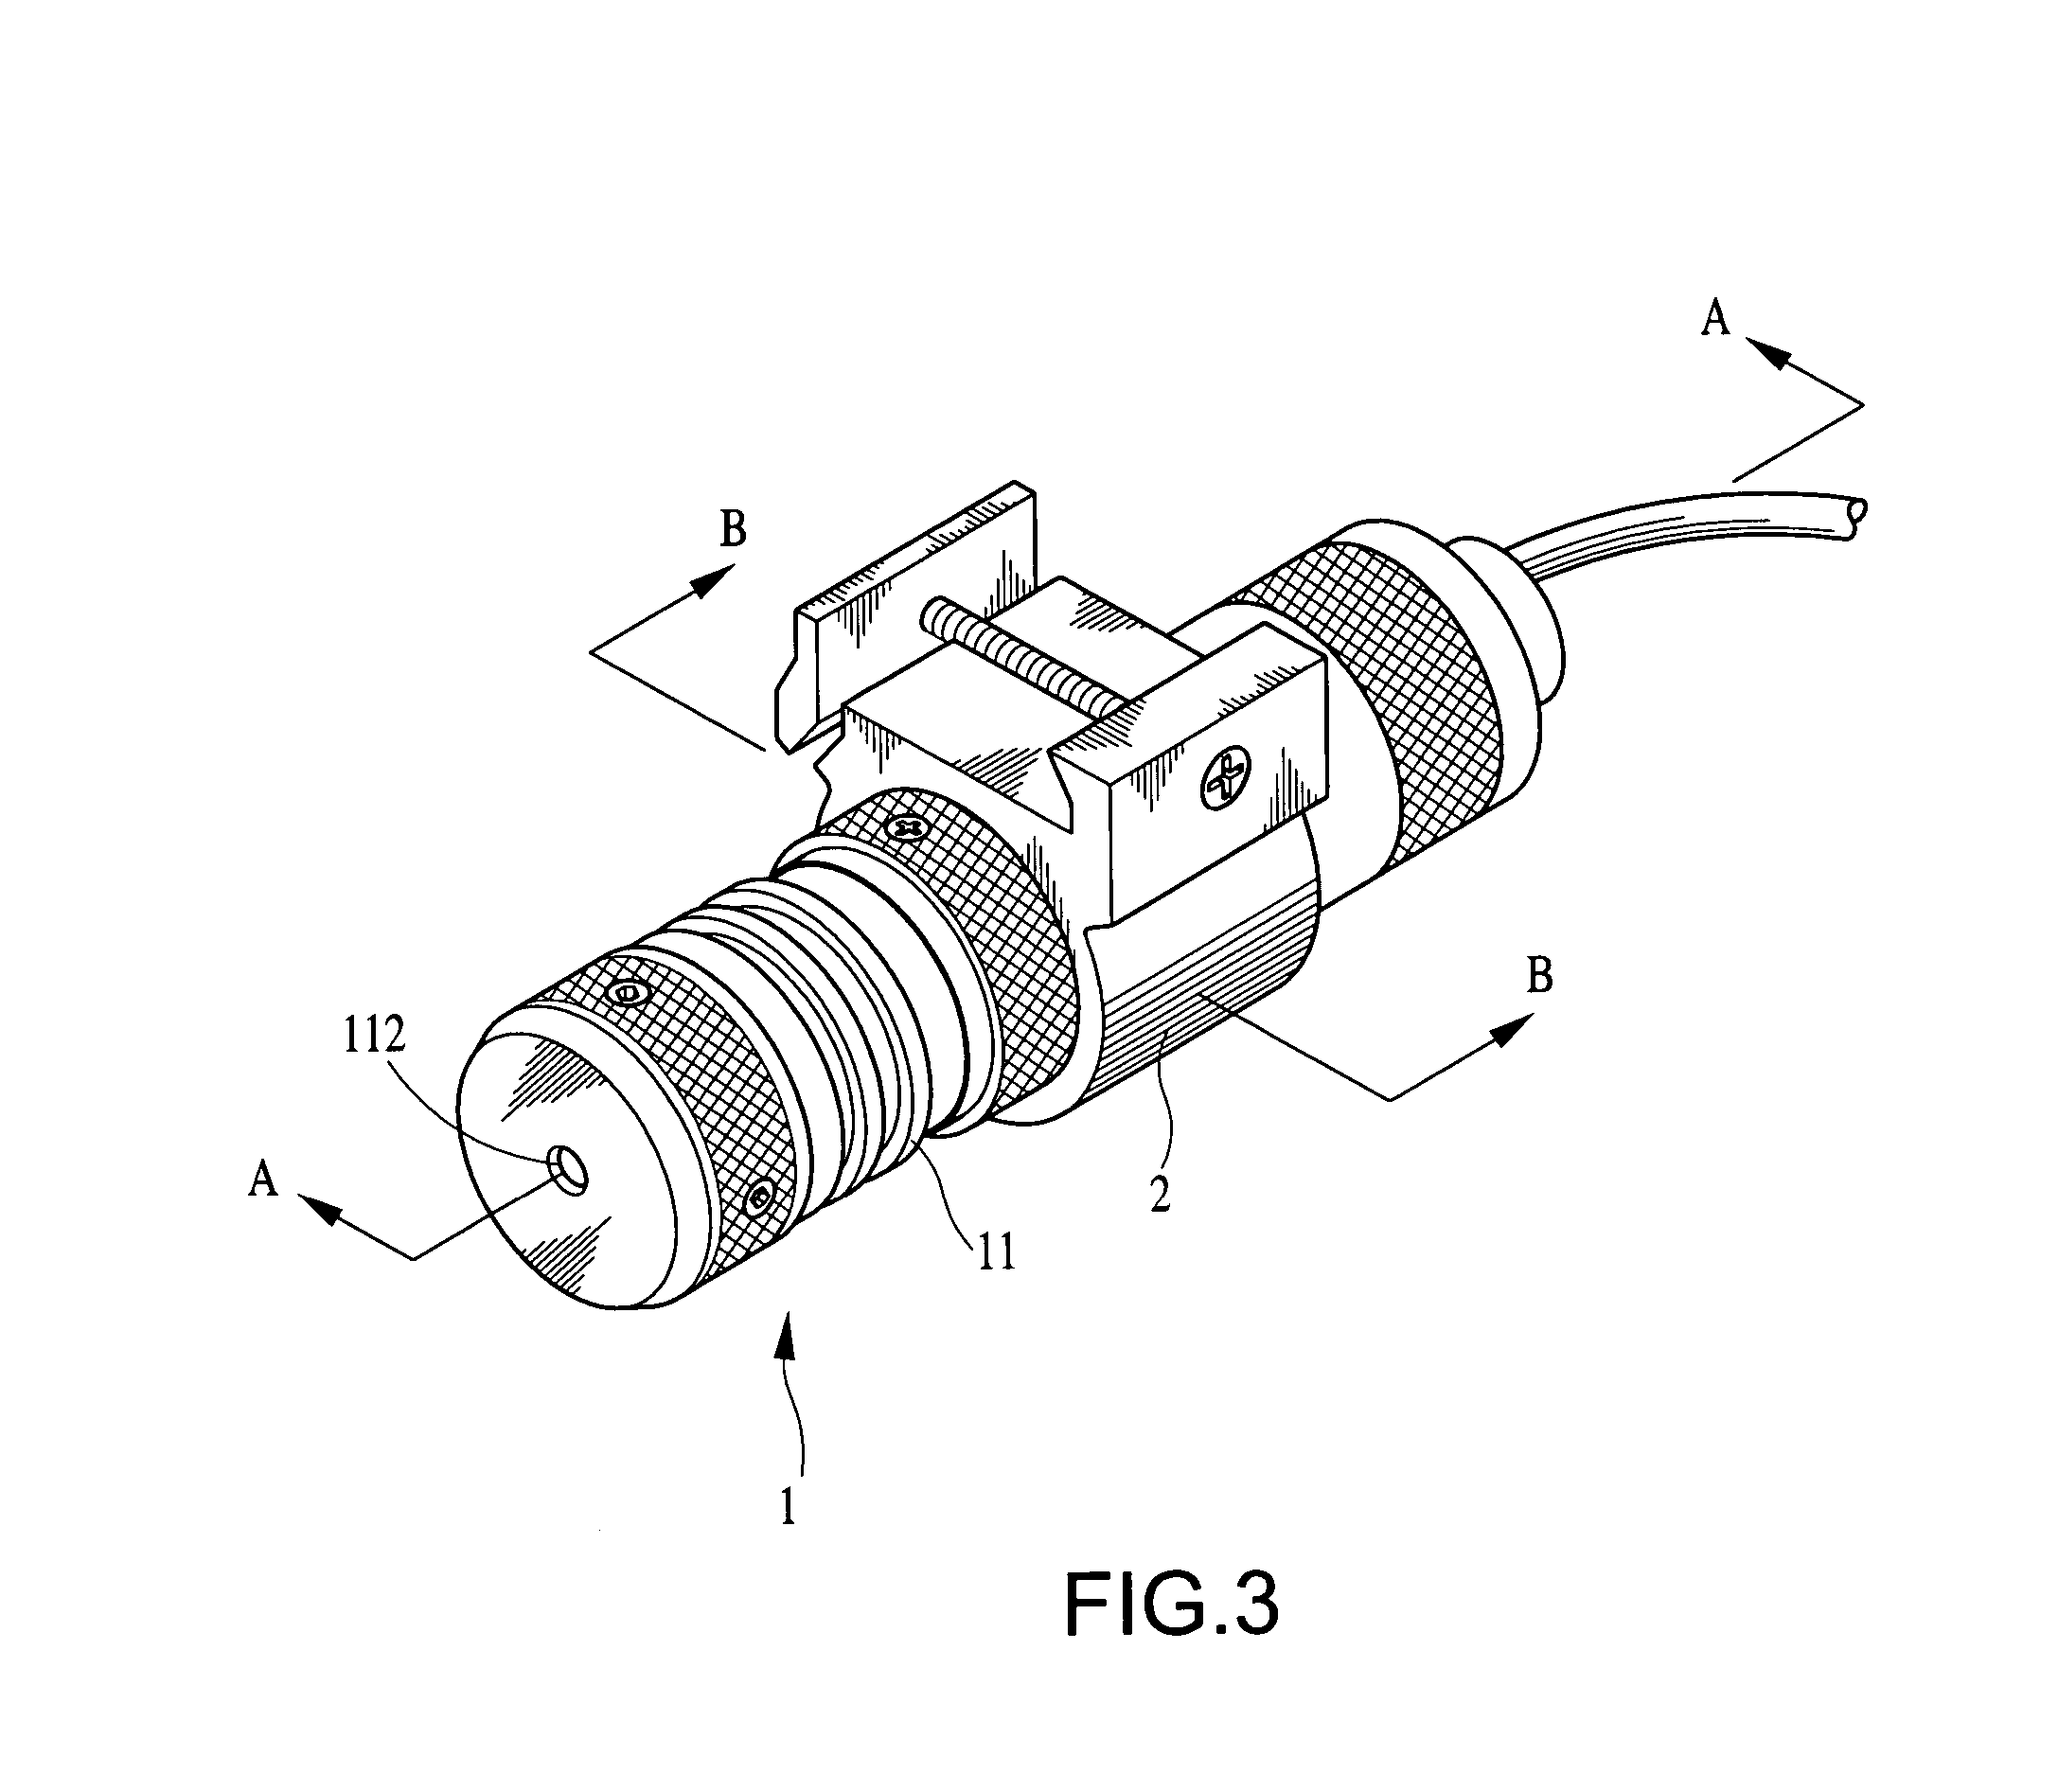 Laser pointer as auxiliary sight of firearm